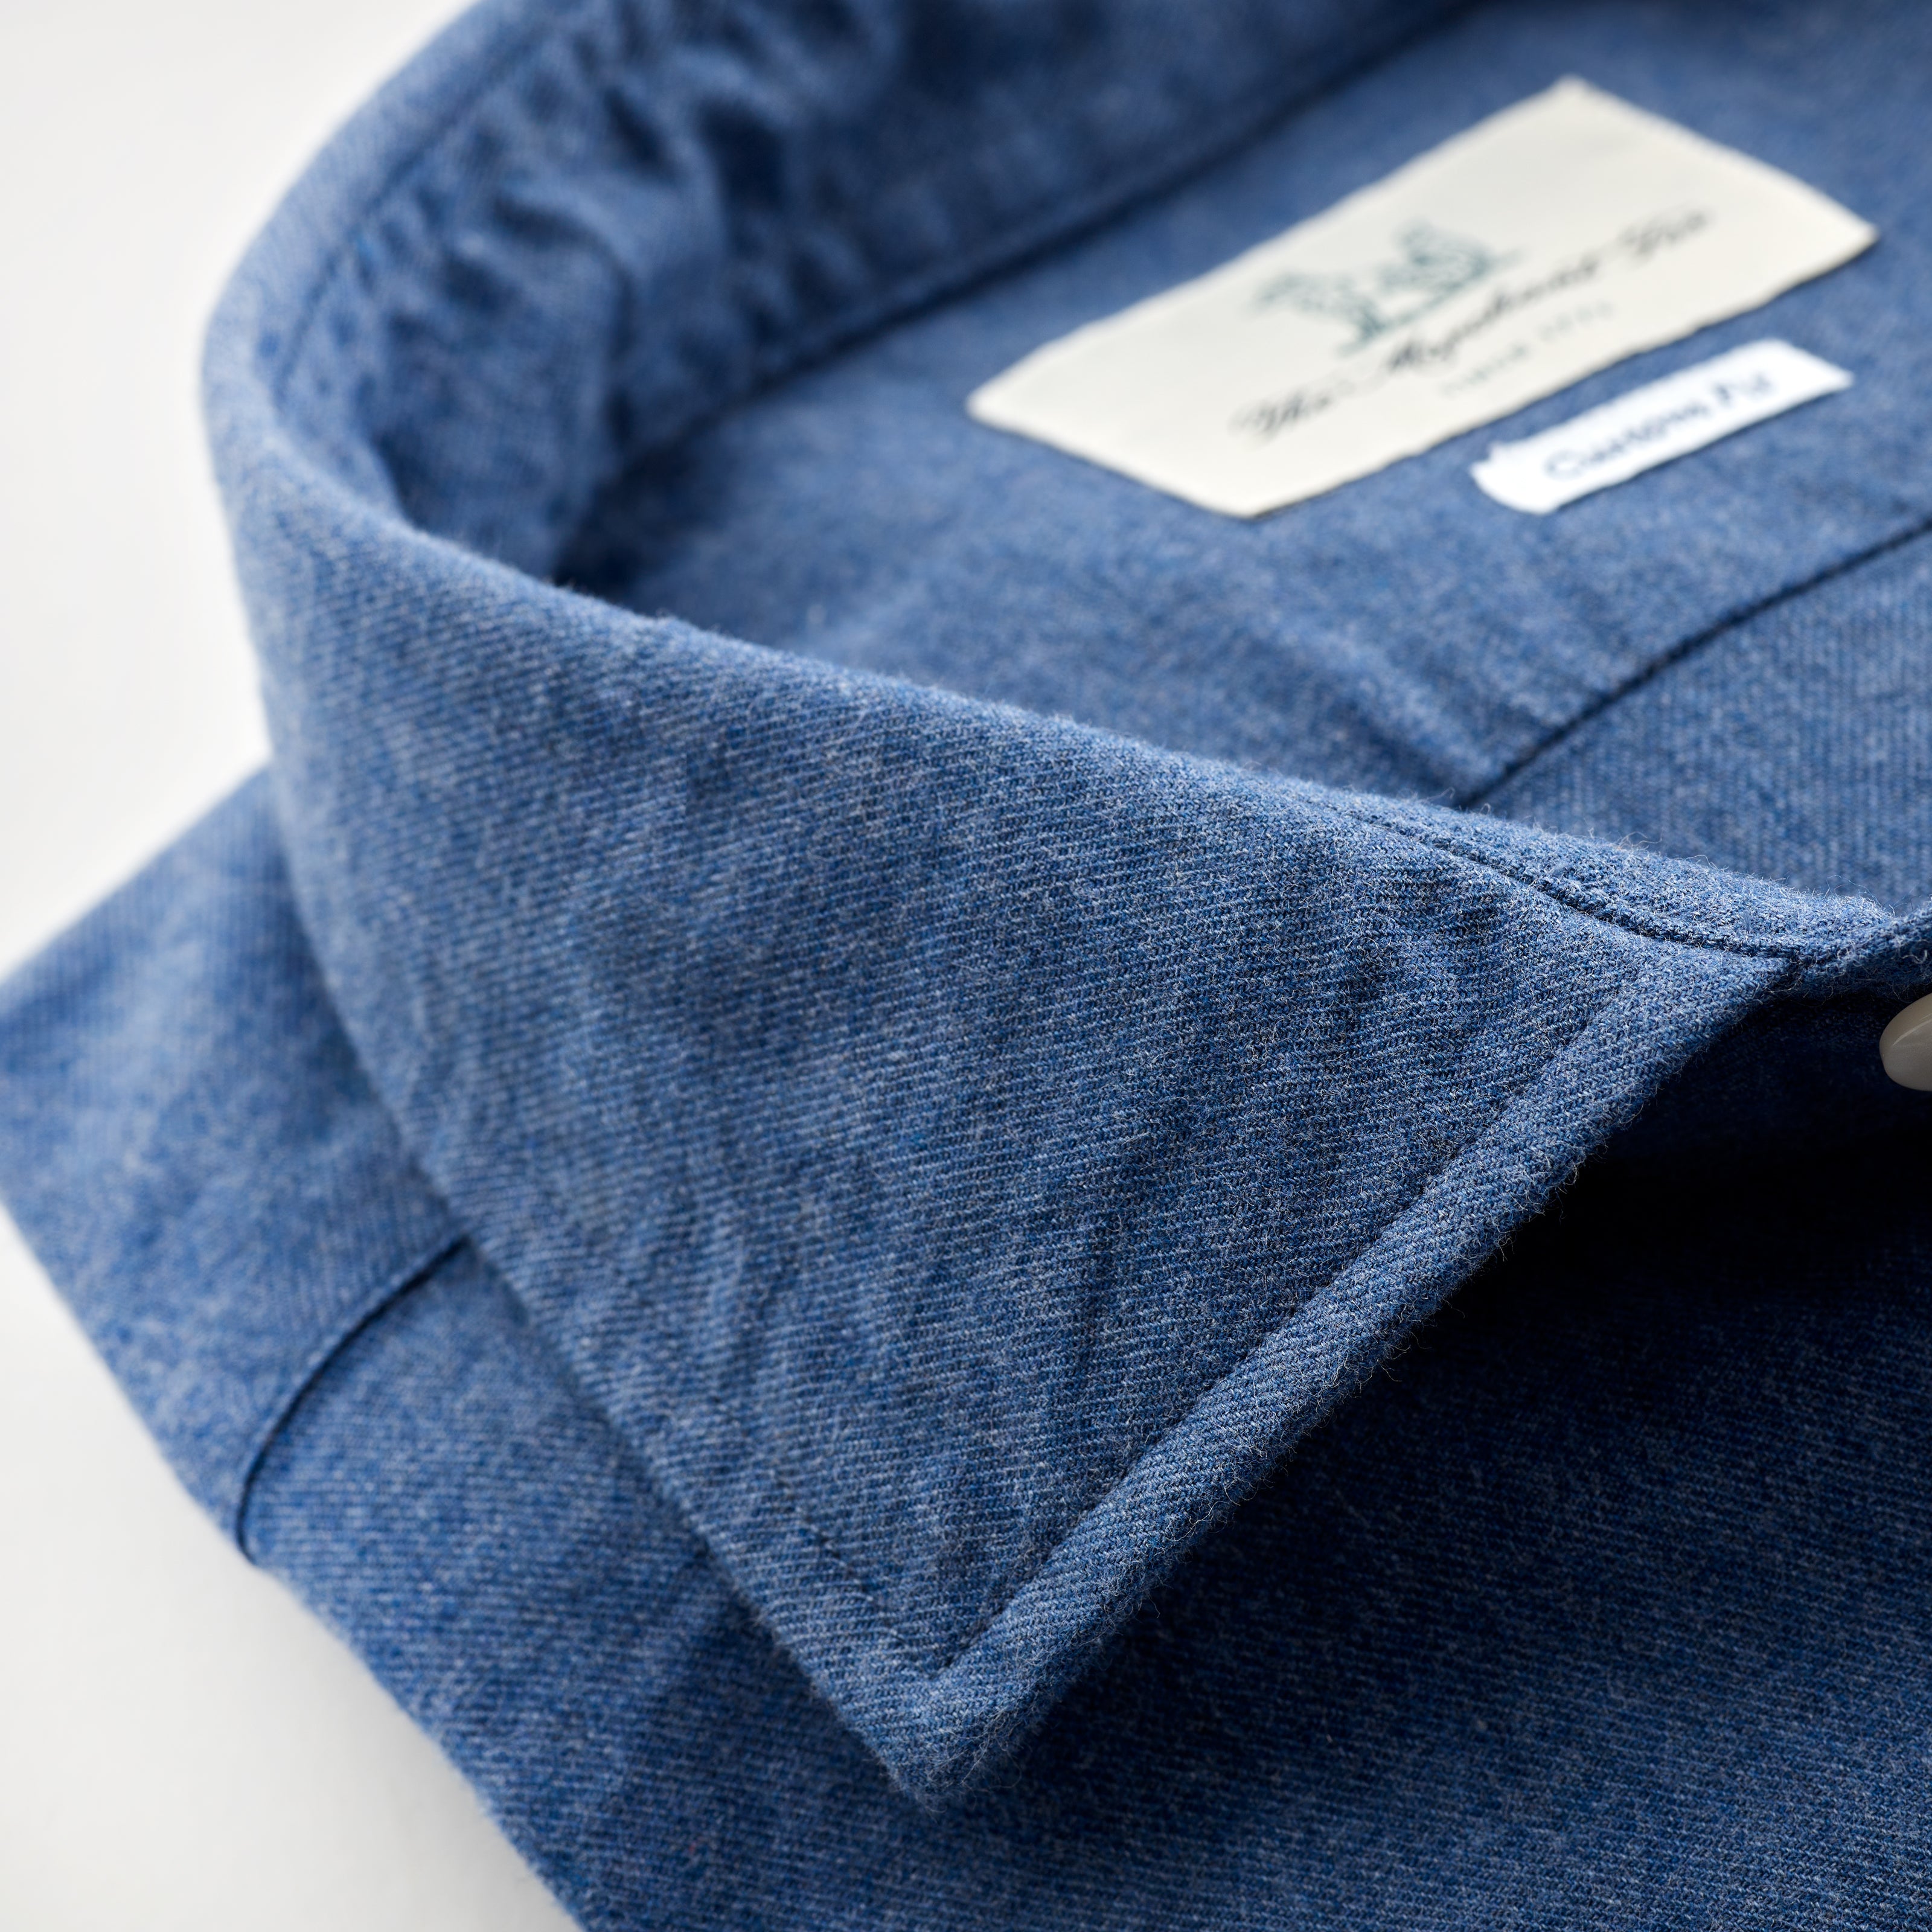 Brushed cotton spread collar shirt in Navy